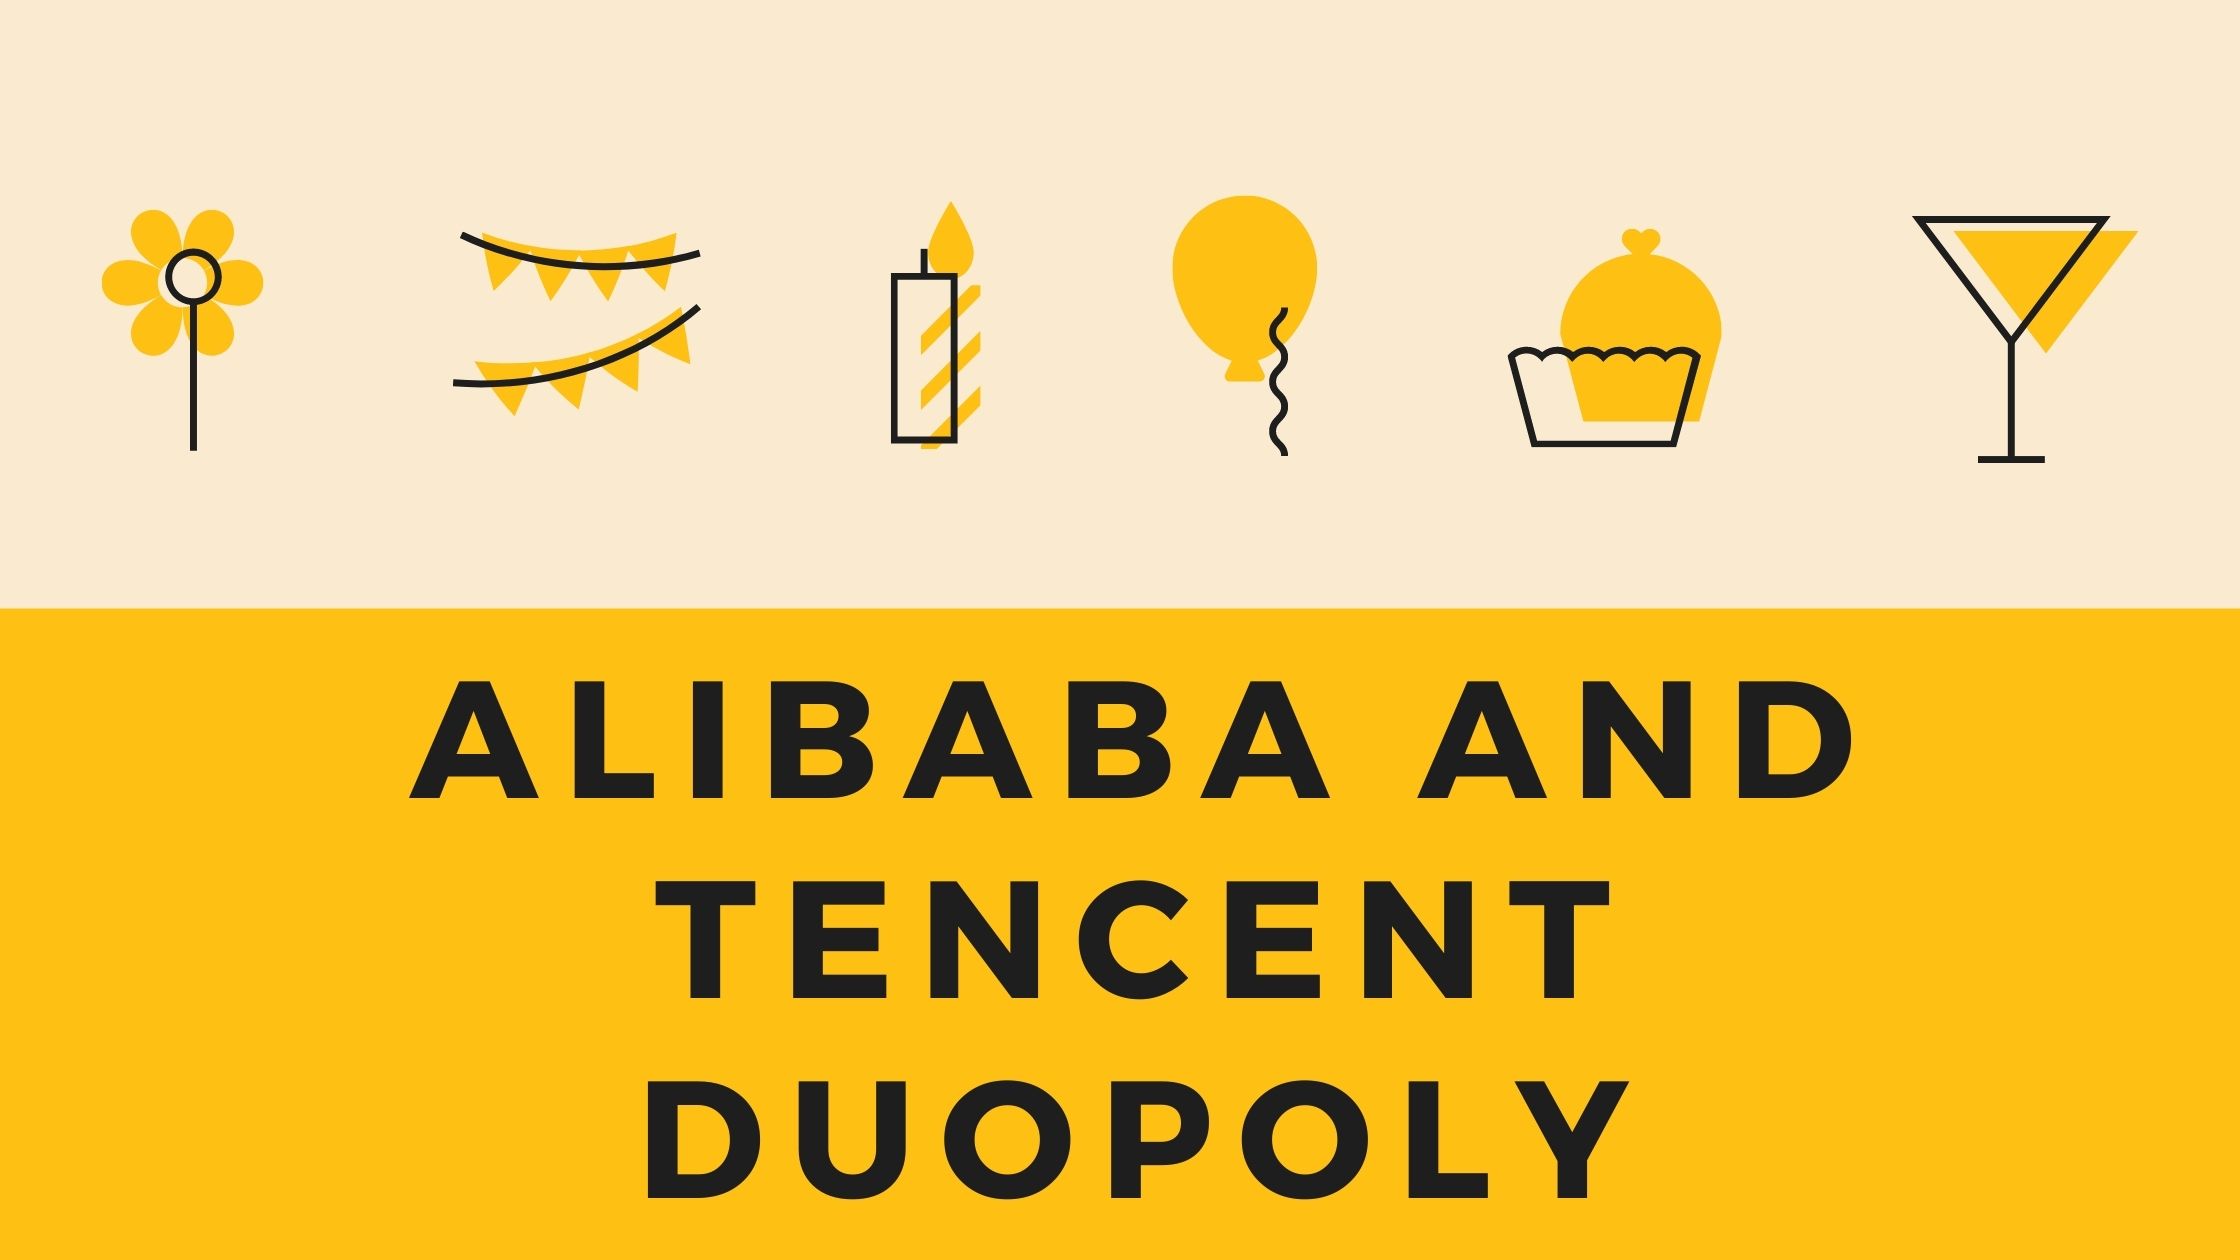 Alibaba and Tencent duopoly